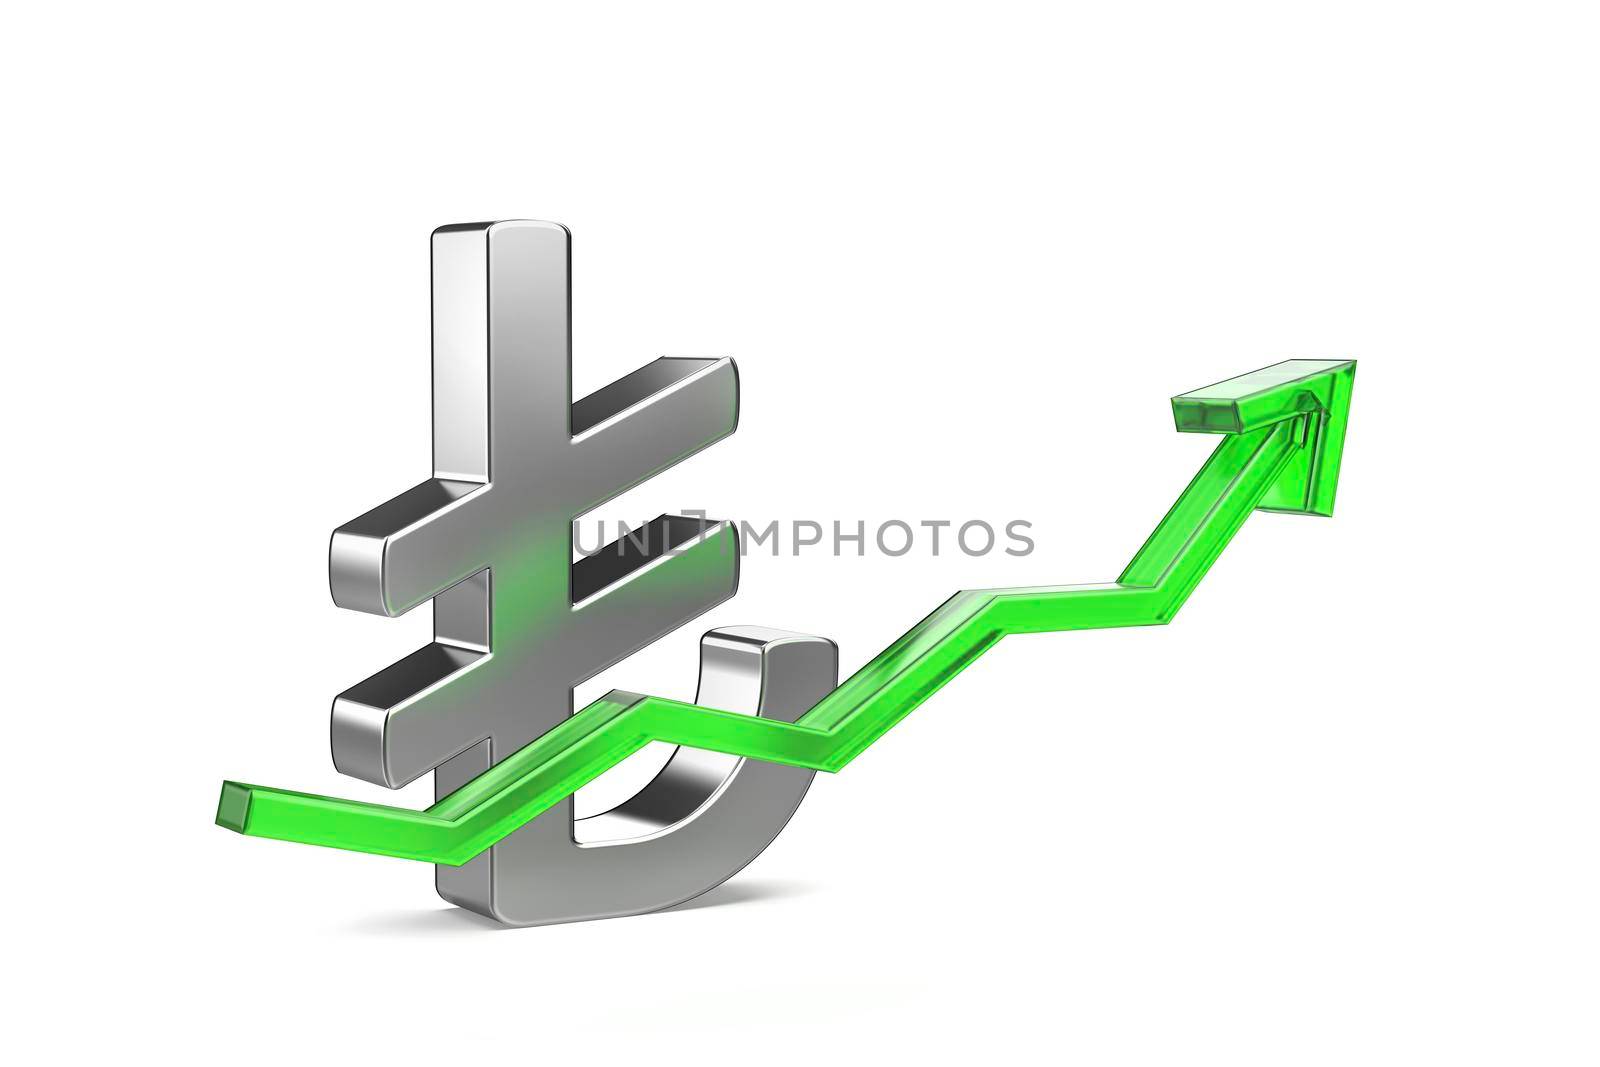 Turkish lira symbol with green arrow pointing up by magraphics